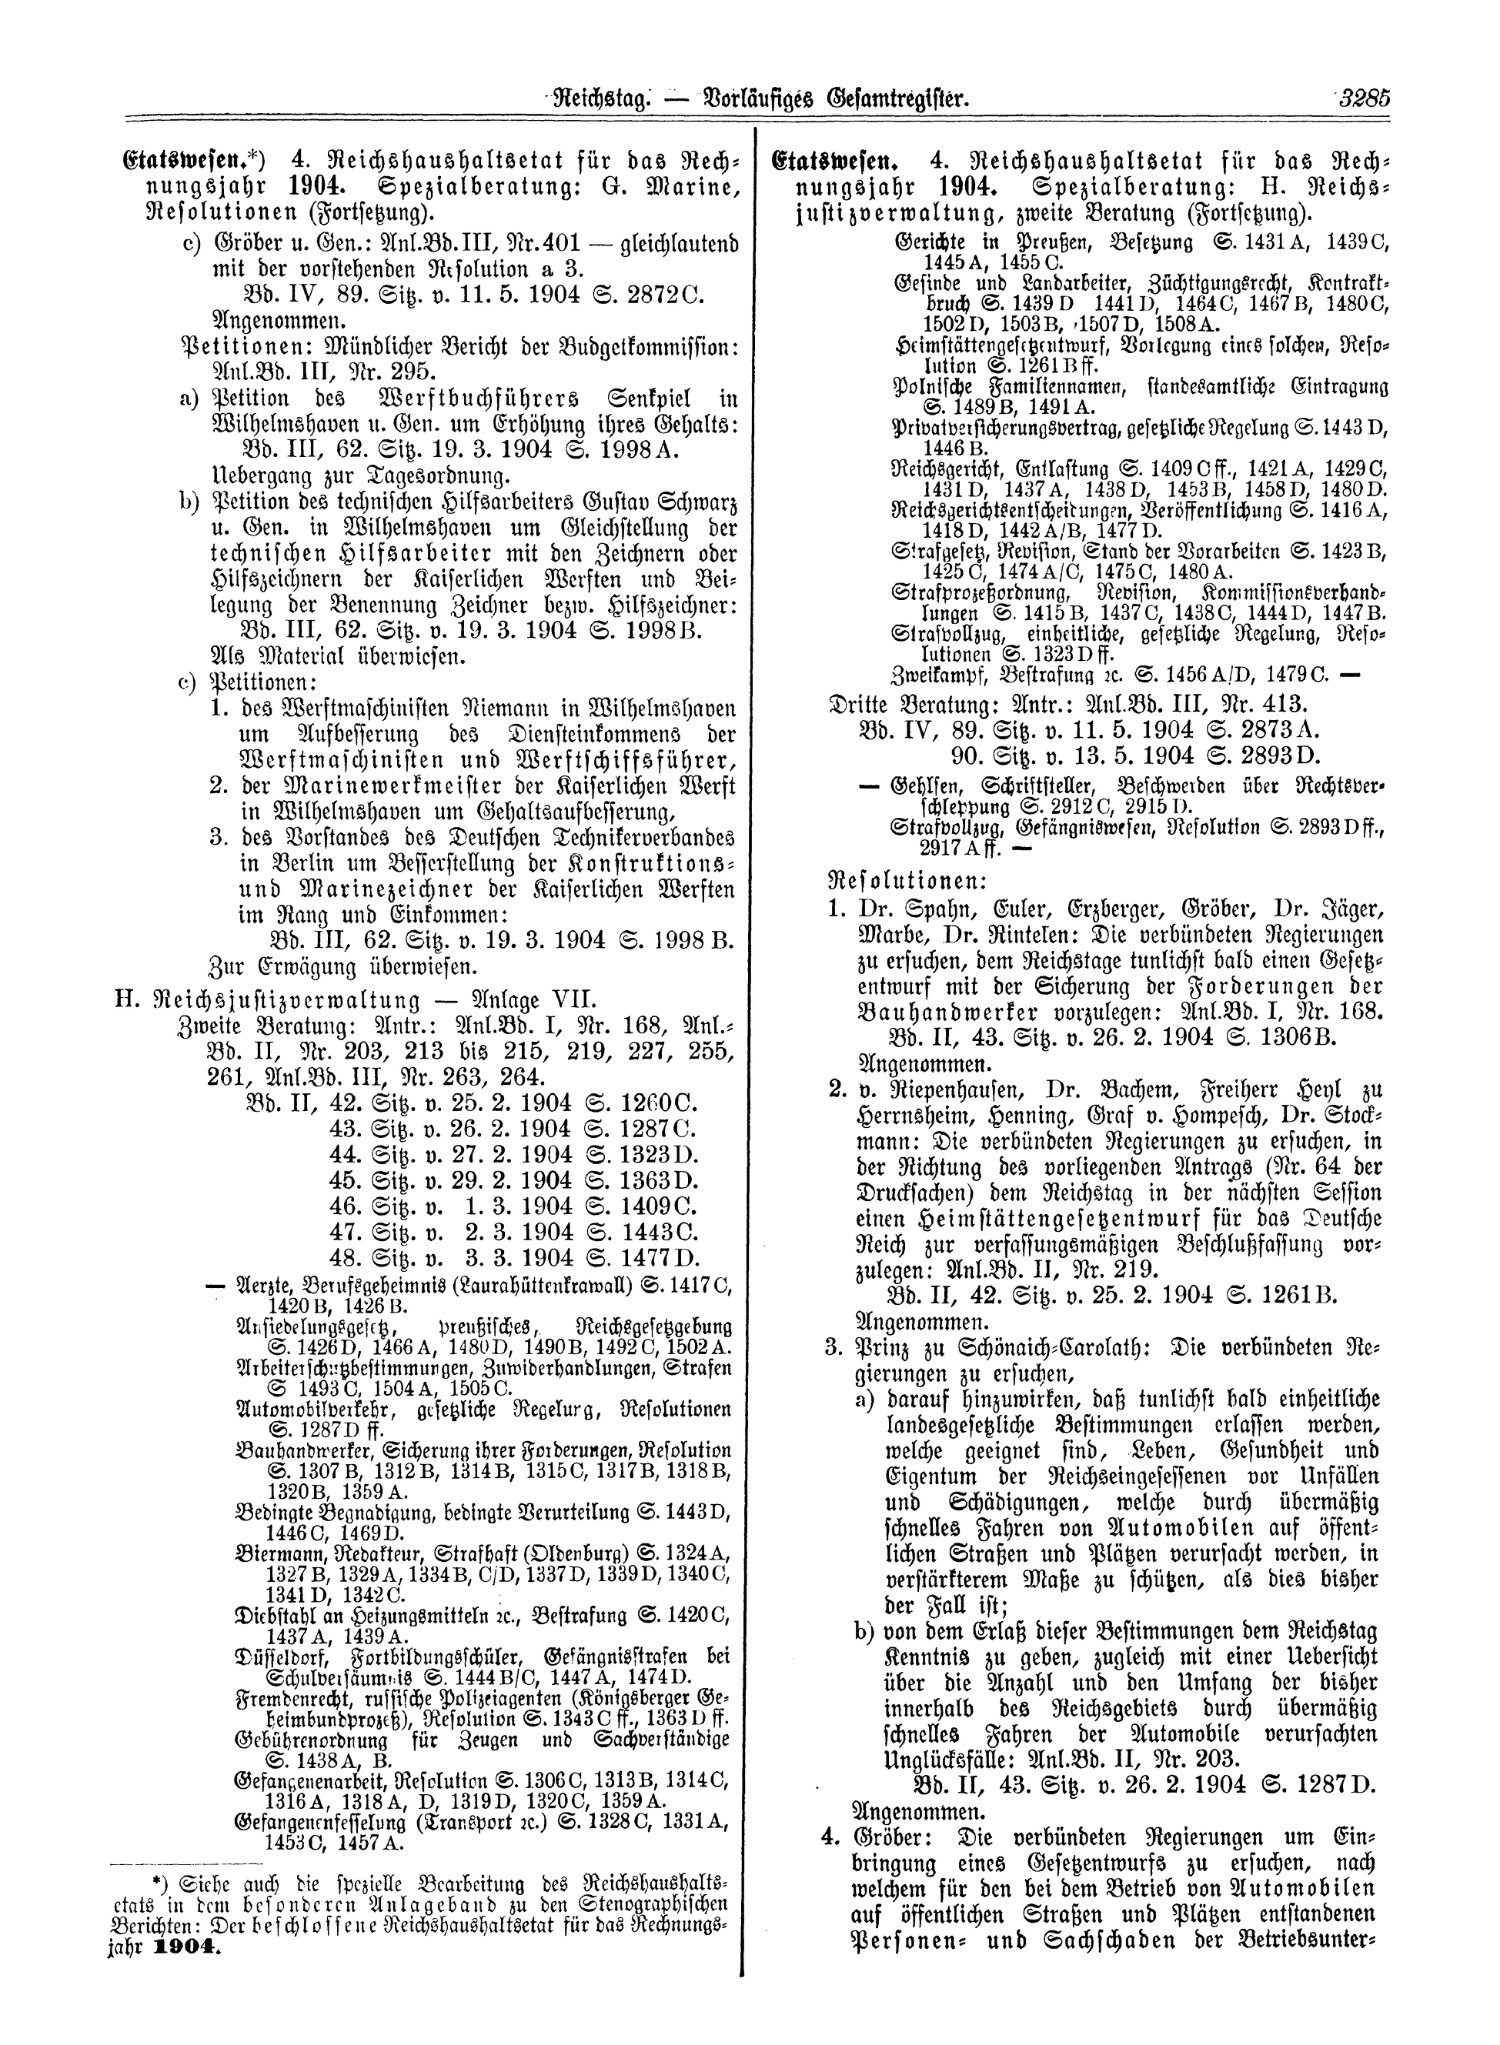 Scan of page 3285